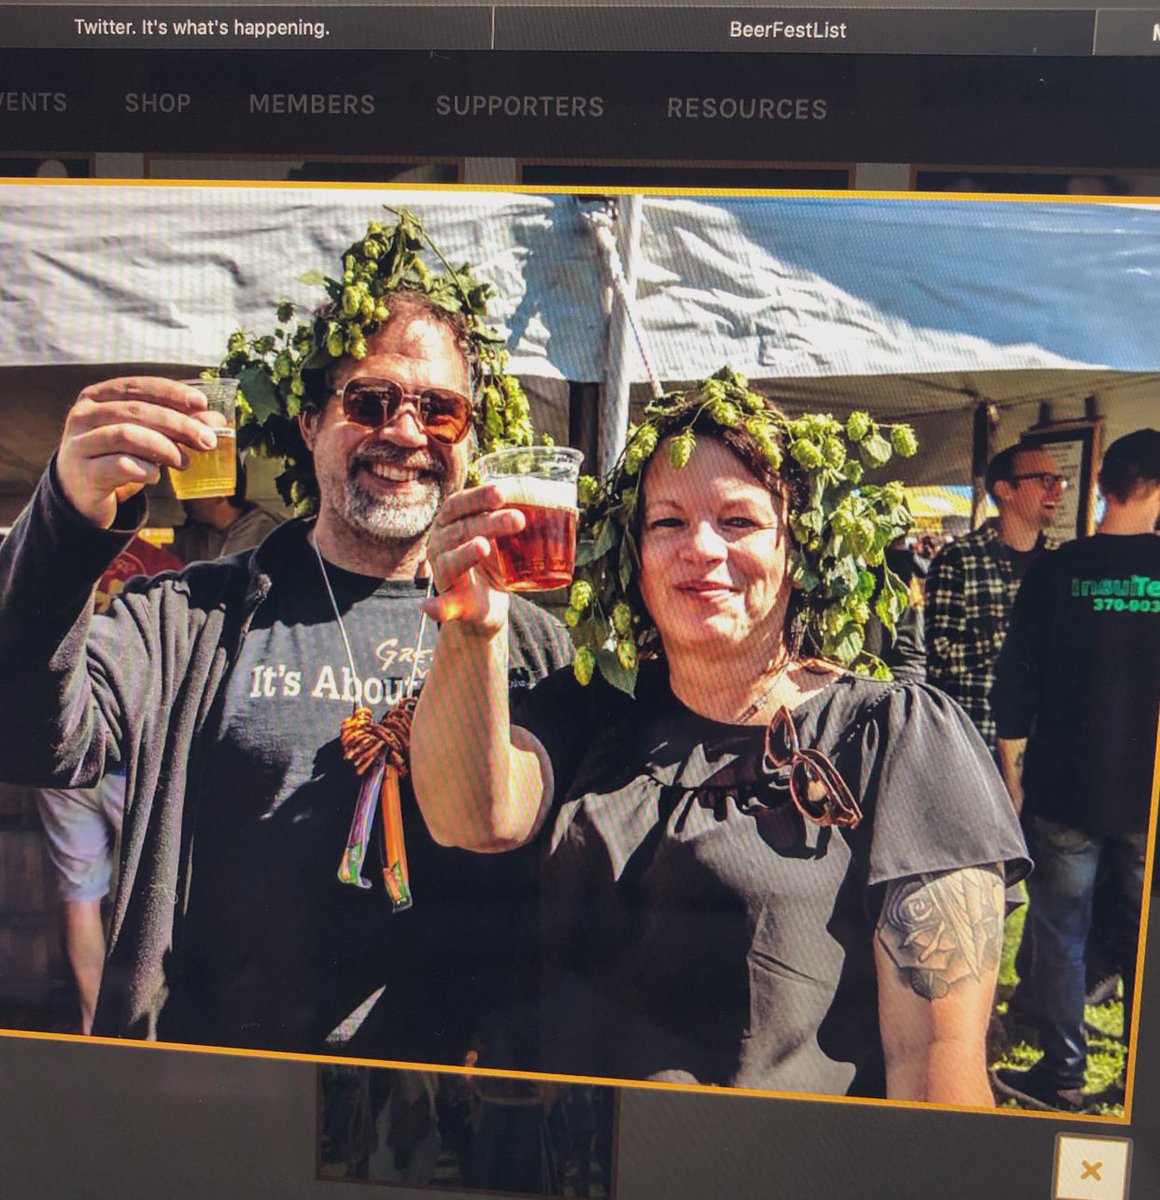 Beerfest this weekend. Pretty cool that a photo of me and a great friend of mine from last year’s festival made their website. We were “hopped up” a bit. 😂 🍻 ♥️ #miBeer #DrinkMiBeer #GreatBeerState #UPfallbeerfestival